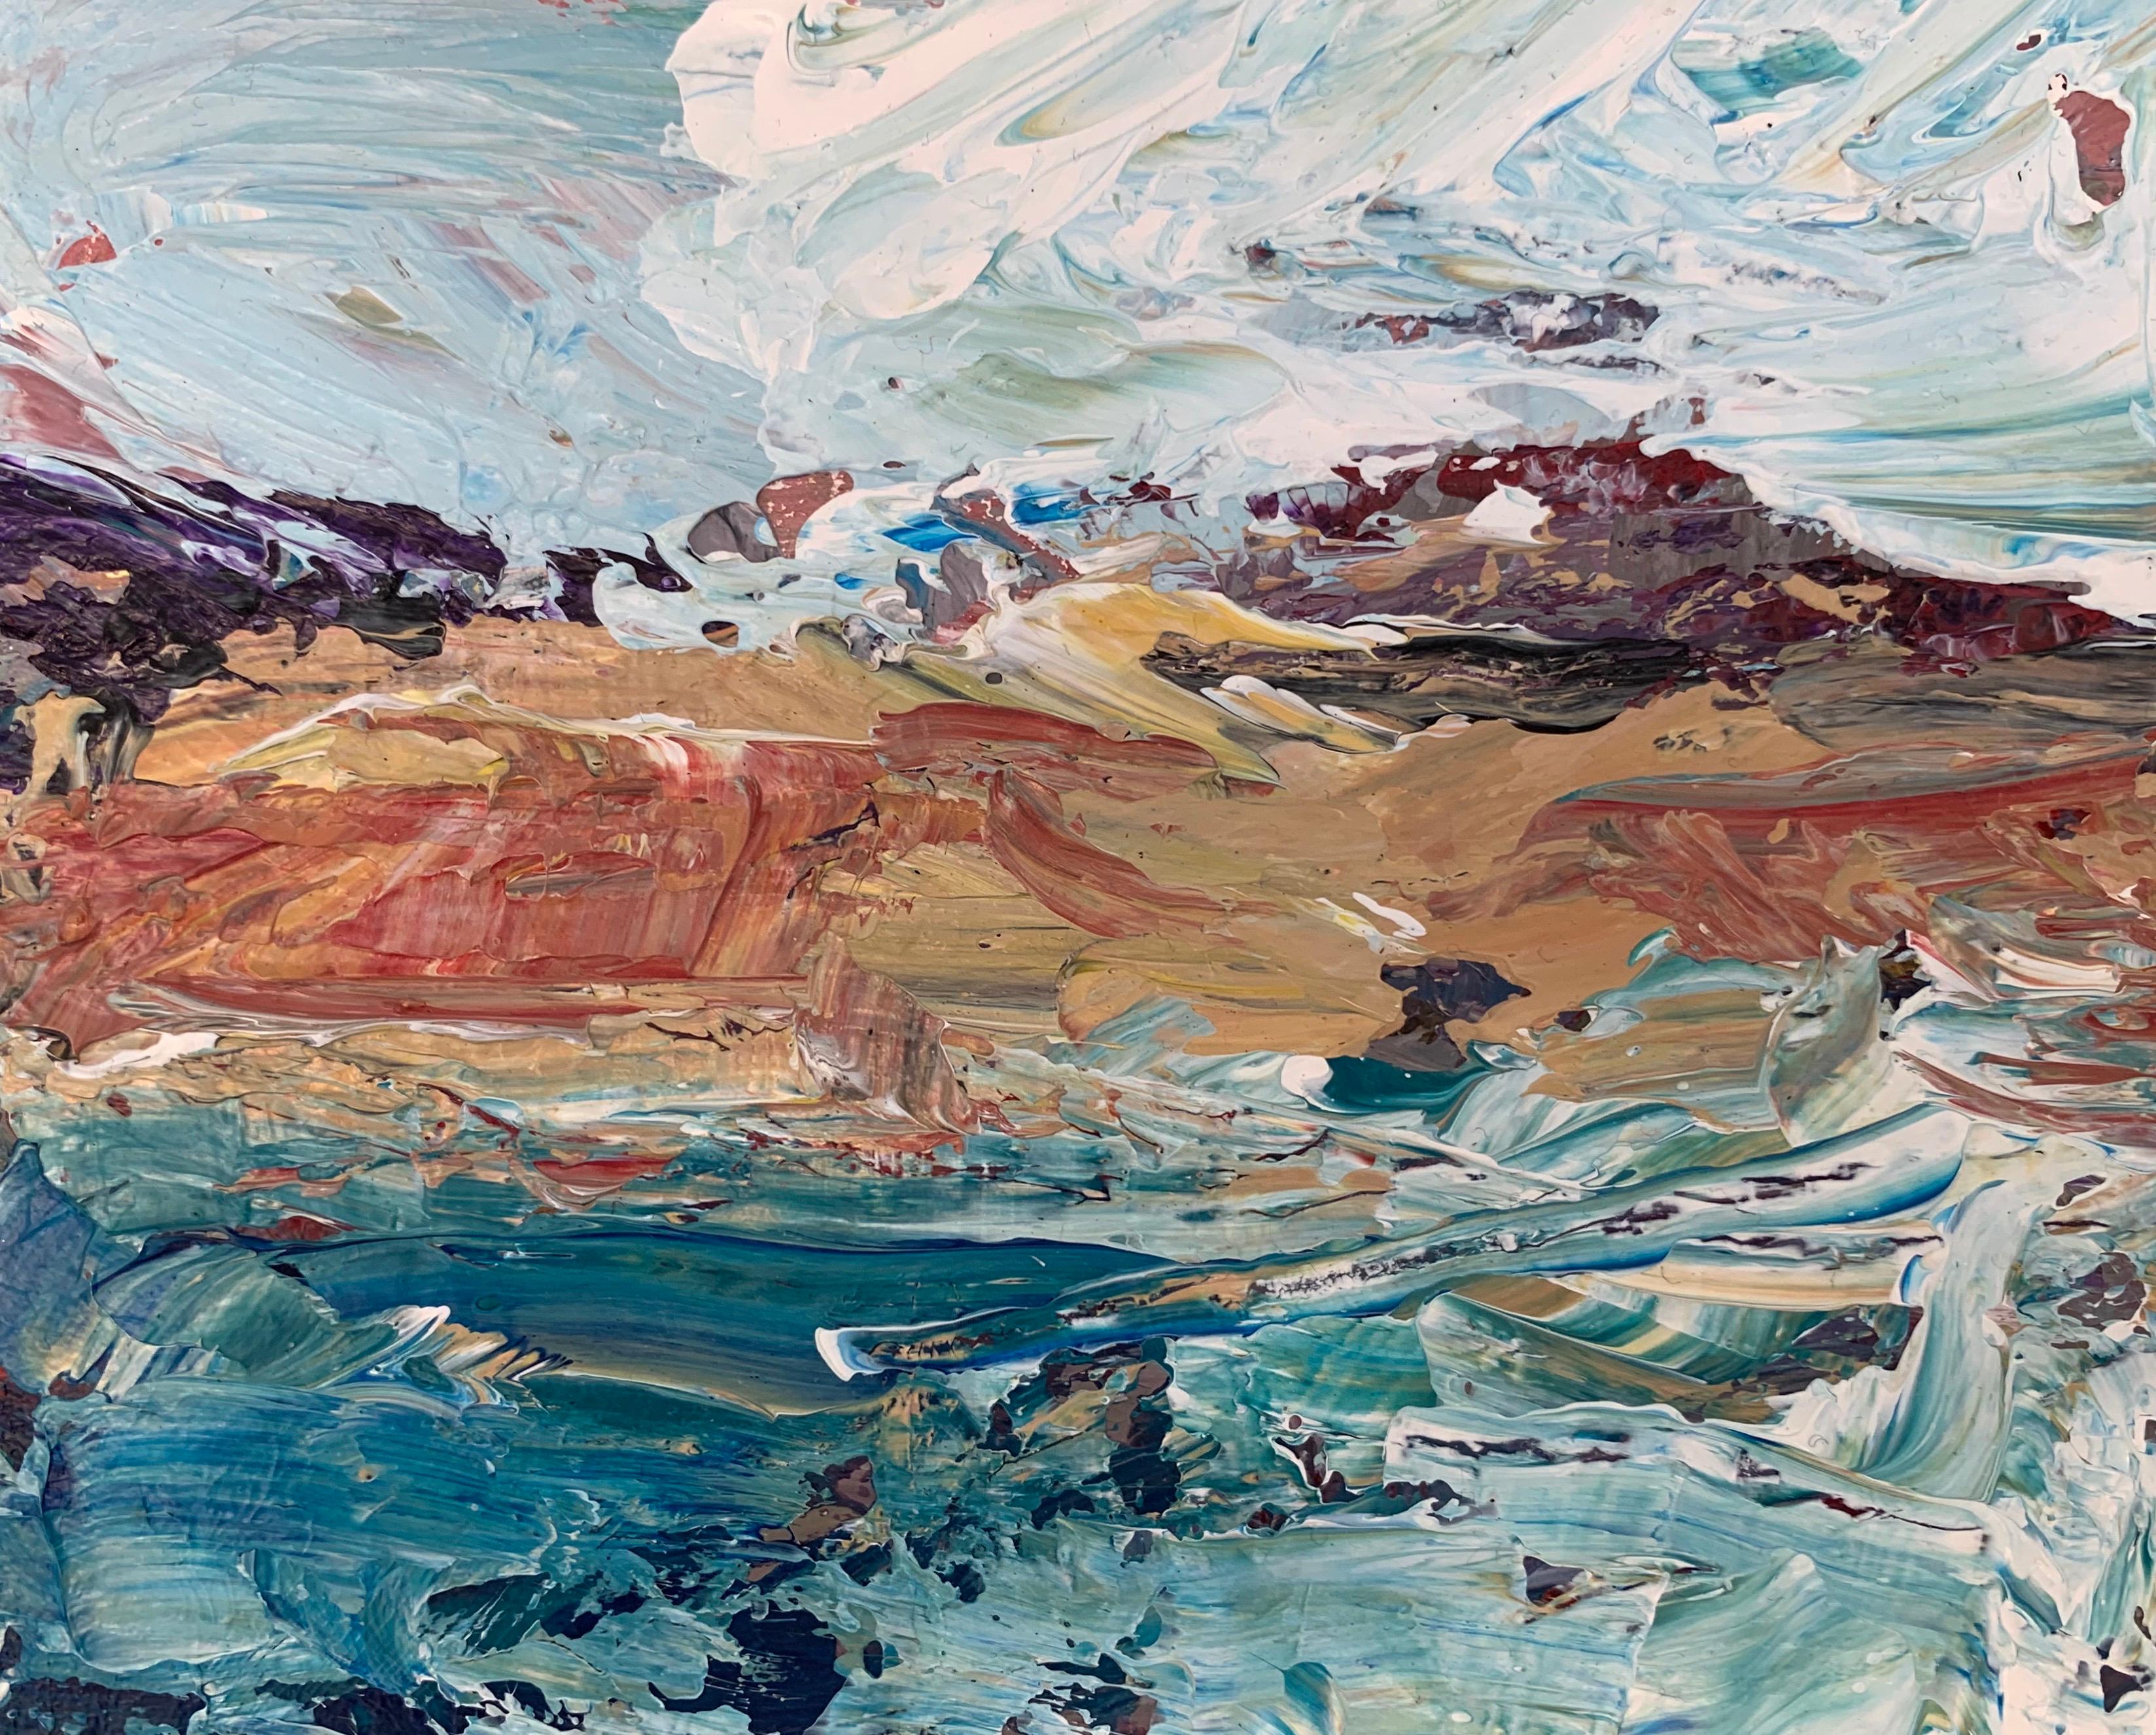 Abstract Seascape Landscape Miniature Study by Contemporary British Artist